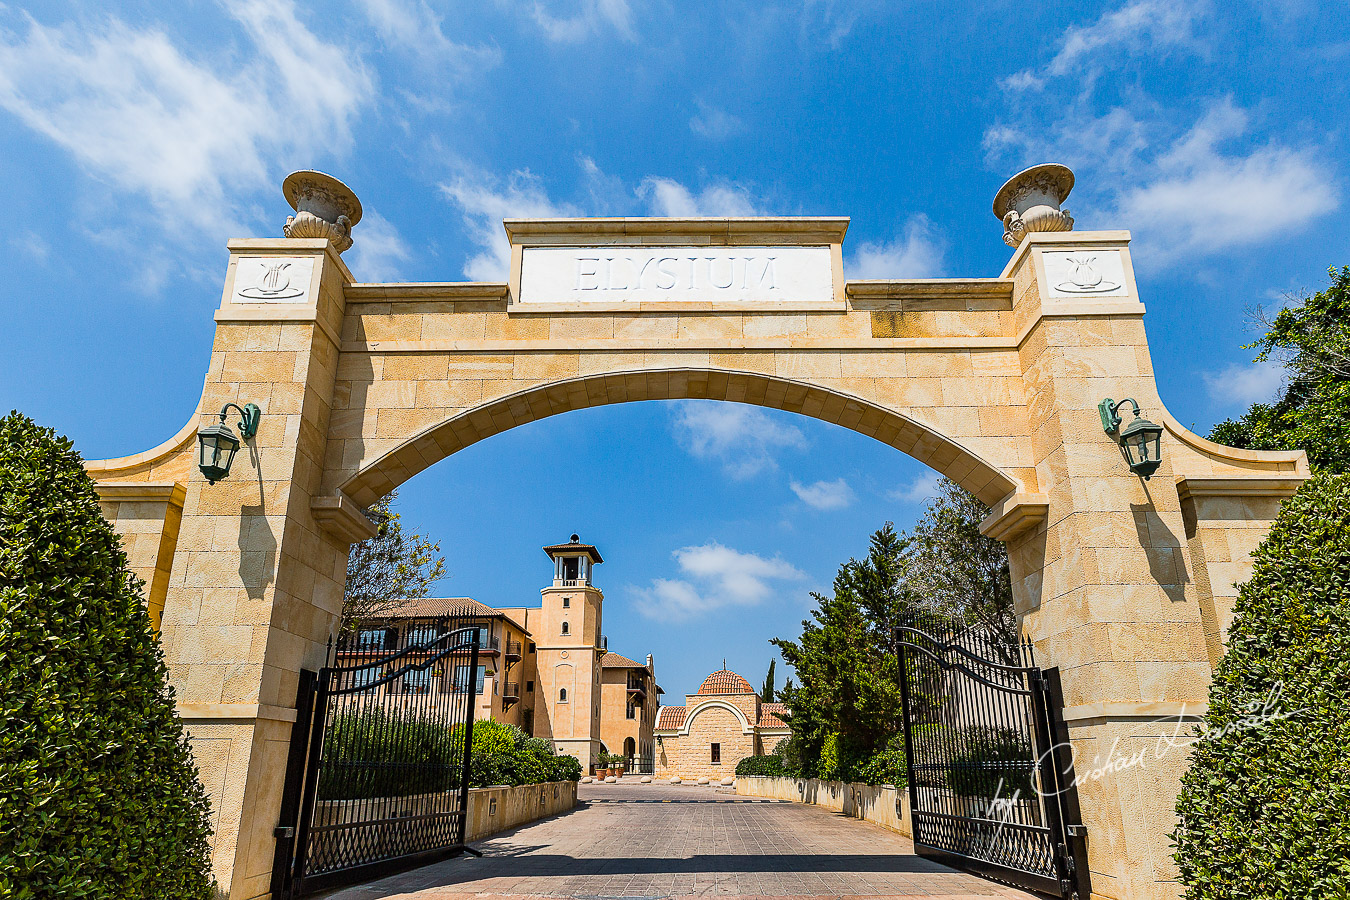 The entrance gate of the beautiful Elysium Hotel in Paphos.